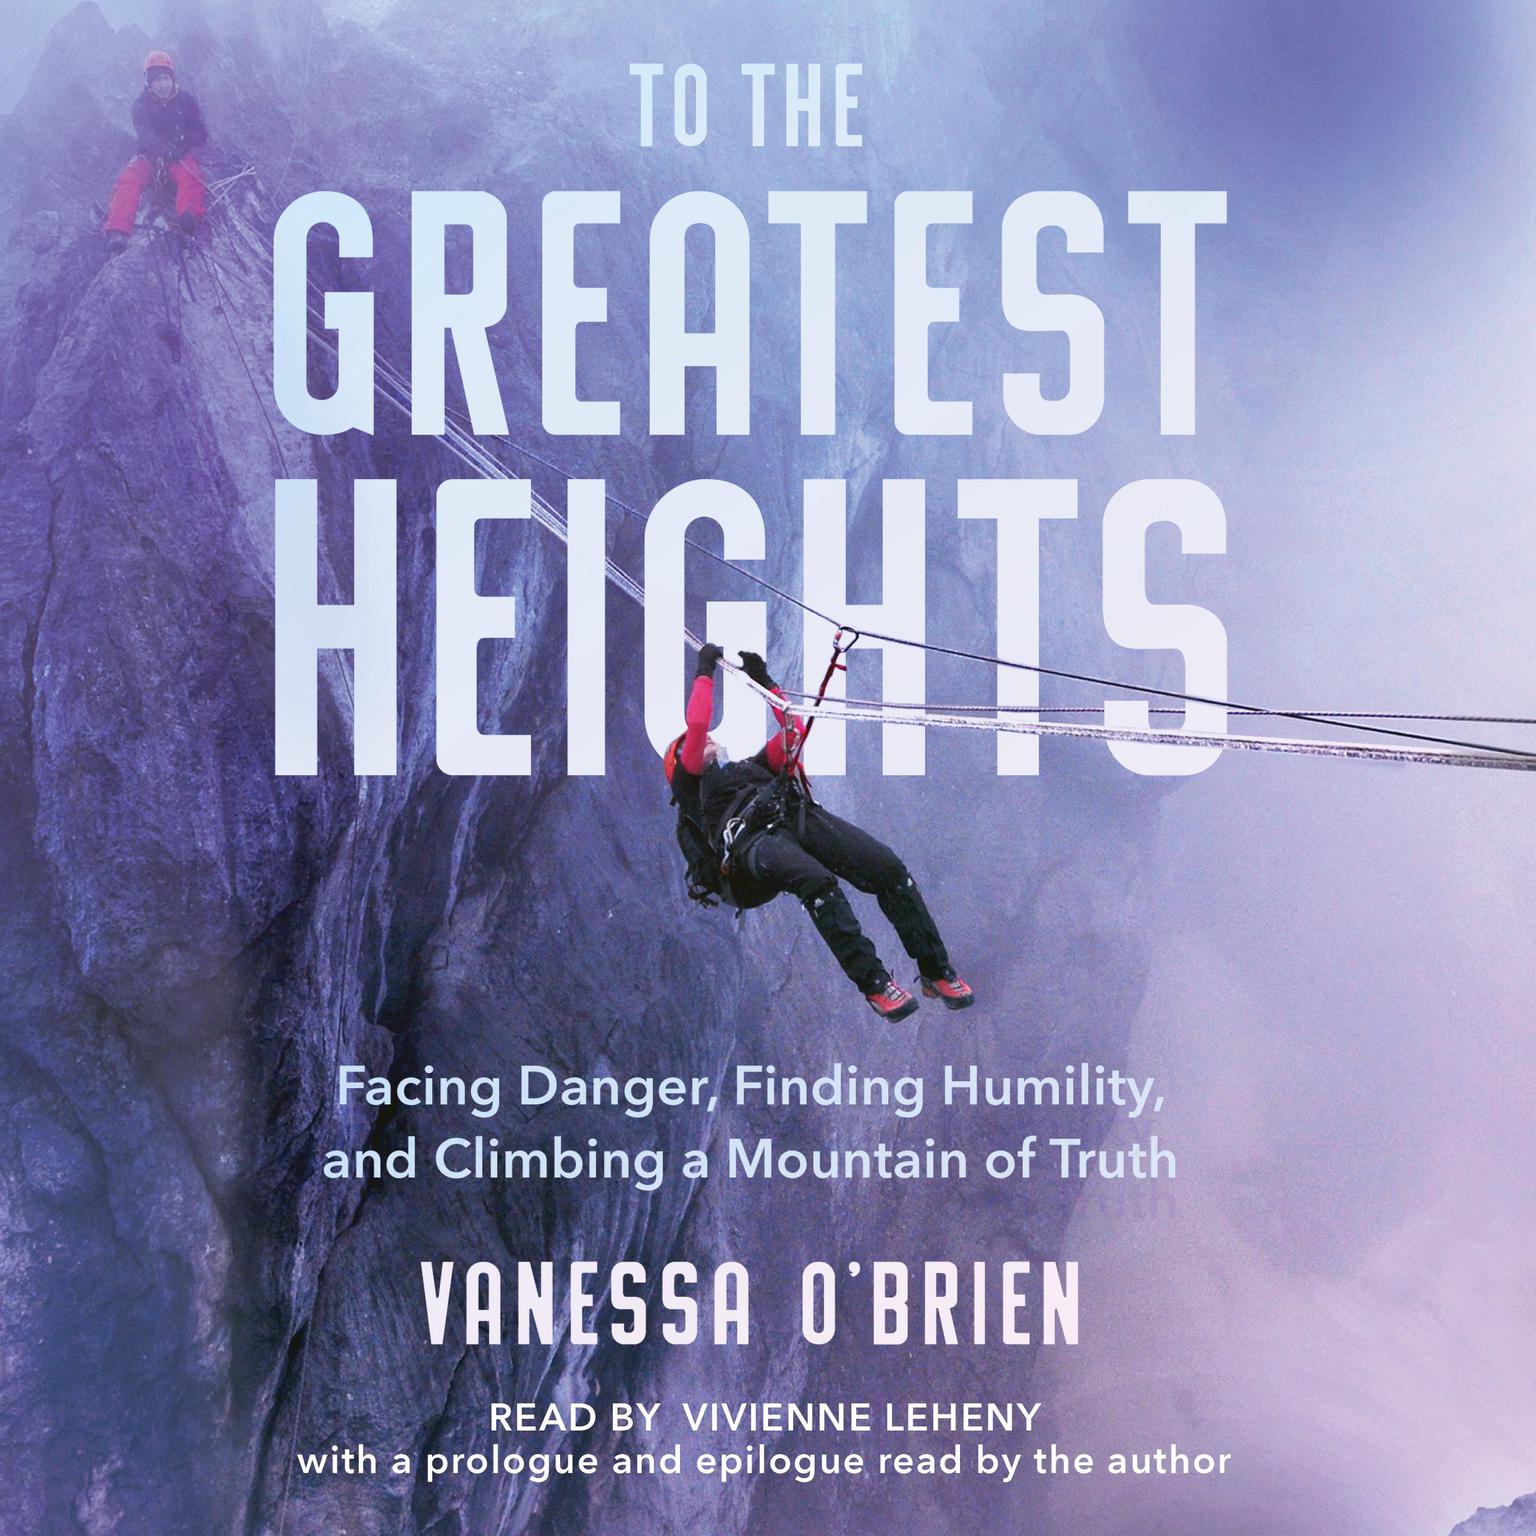 To the Greatest Heights: Facing Danger, Finding Humility, and Climbing a Mountain of Truth Audiobook, by Vanessa O'Brien